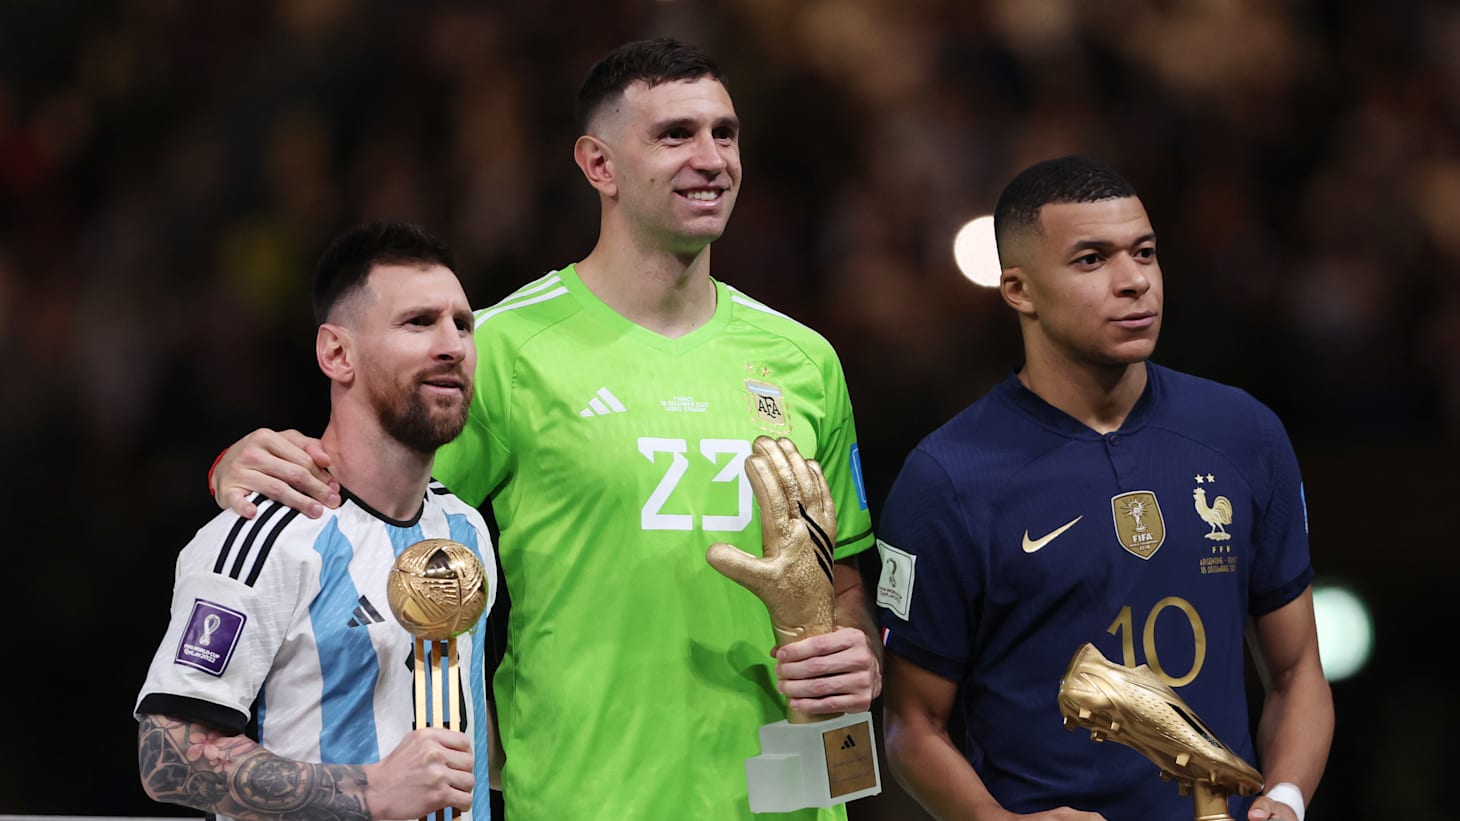 FIFA World Cup 2022: Who is winning the race for the Golden Glove?